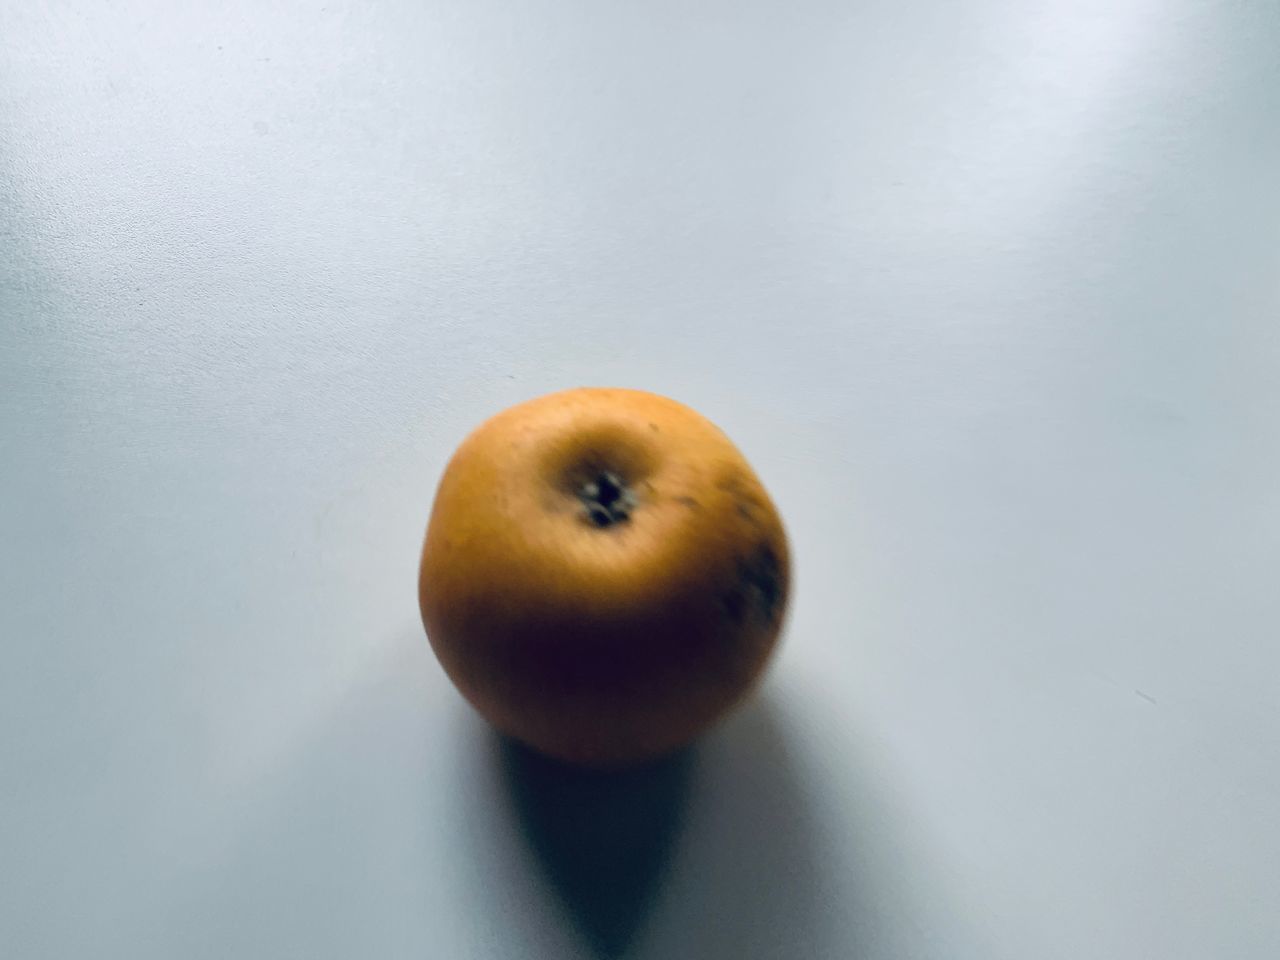 HIGH ANGLE VIEW OF APPLE ON WHITE BACKGROUND